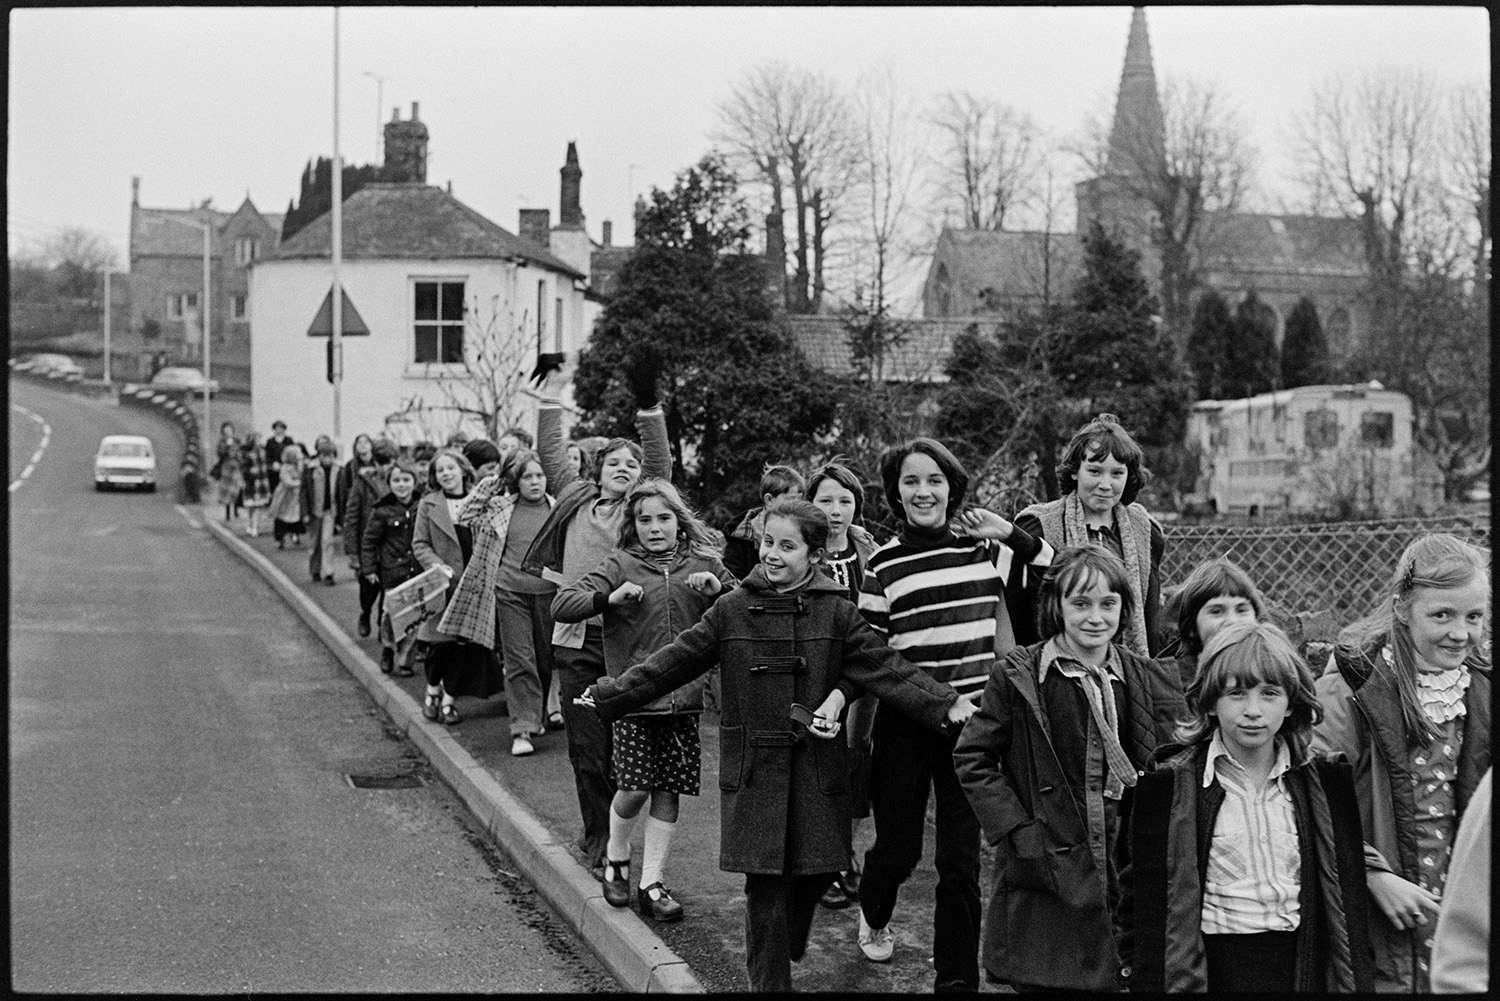 Crocodile of schoolchildren going through village. 
[A group of schoolchildren walking along a road through Bishops Tawton. Some of the children are waving. A church with a spire is visible in the background.]